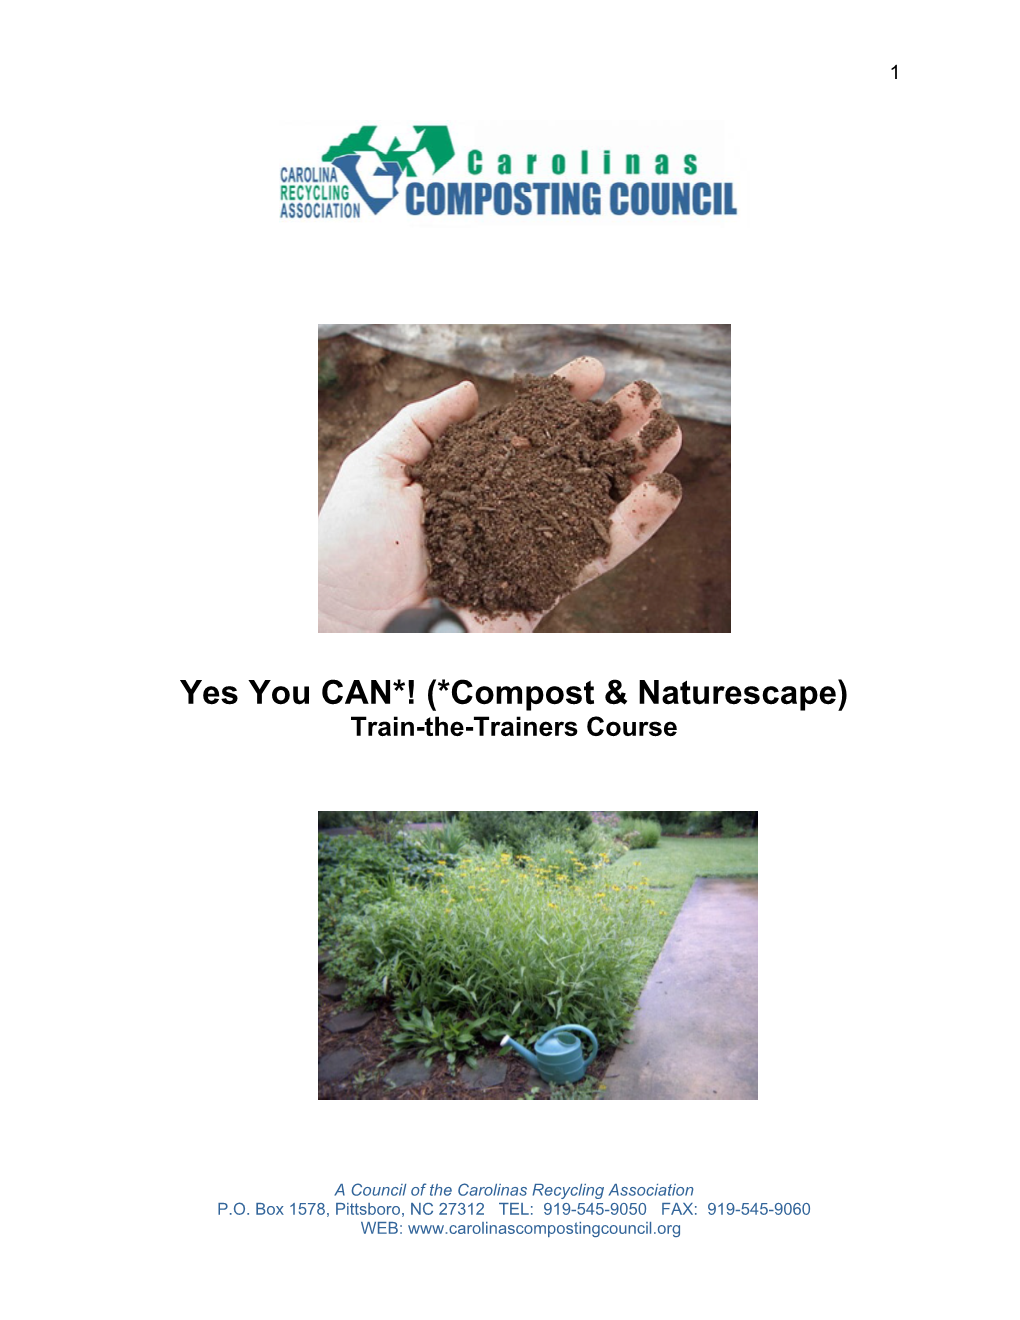 Yes You CAN! (Compost & Naturescape!)